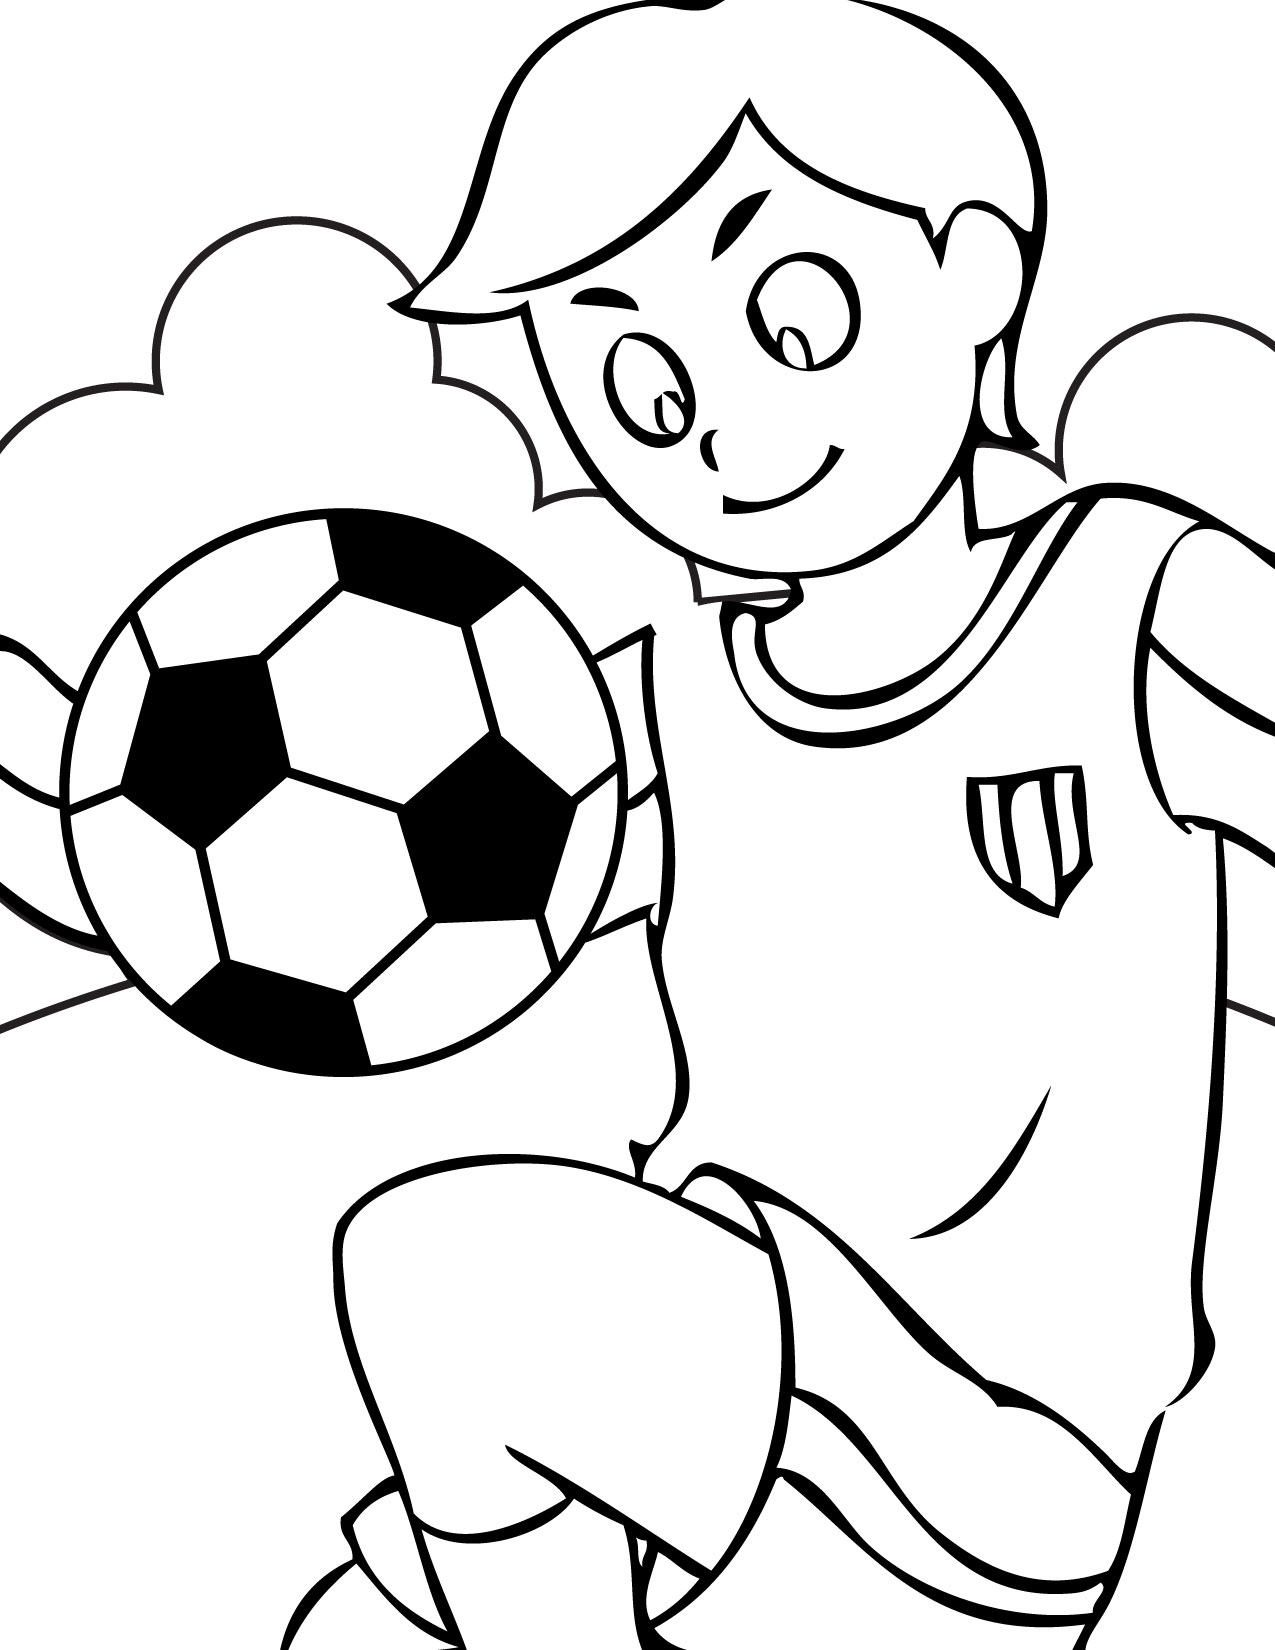 Football Coloring Pictures